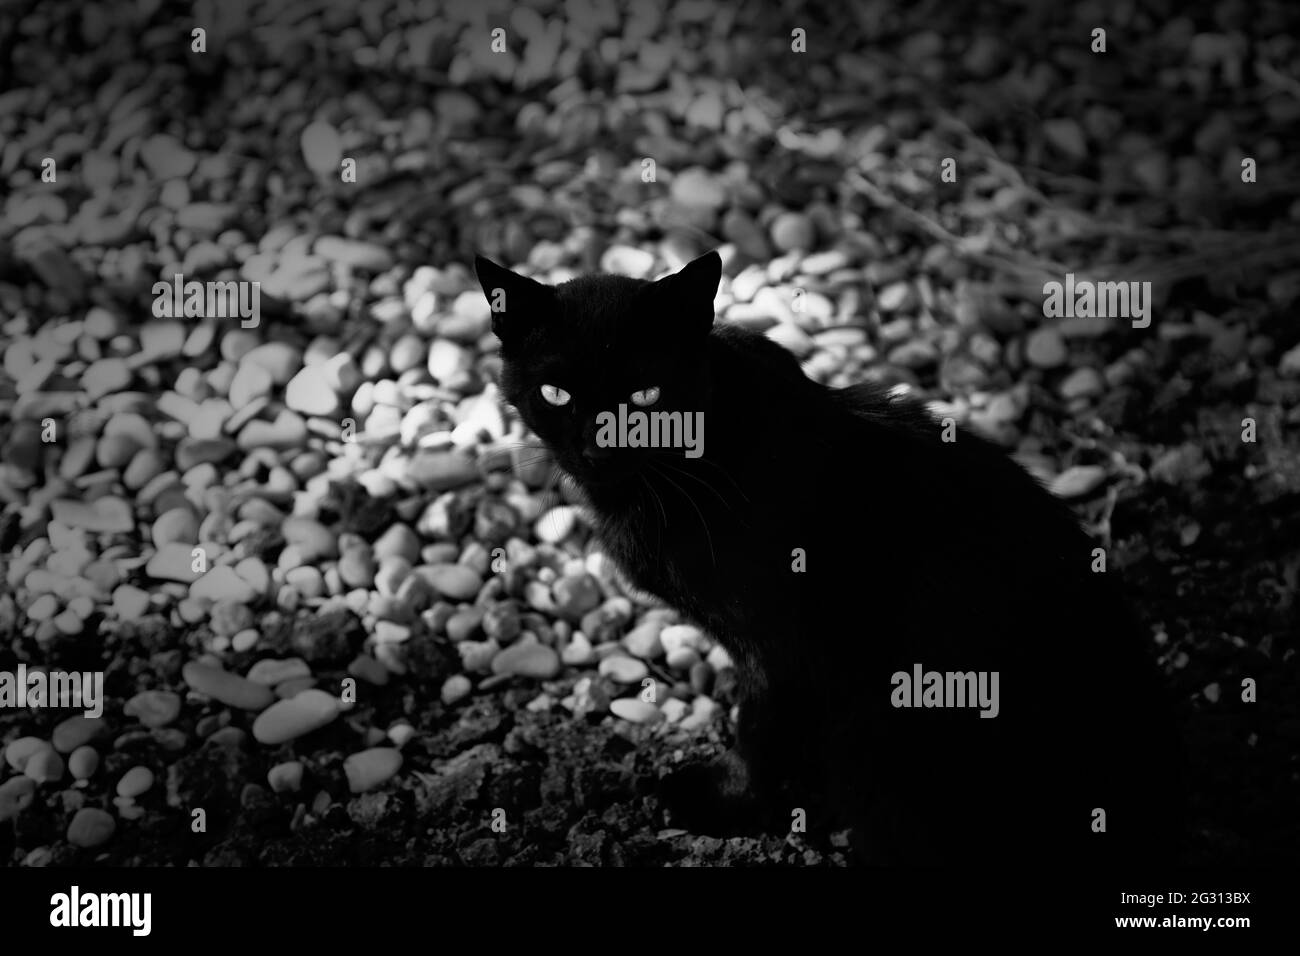 Killer cat Black and White Stock Photos & Images - Alamy